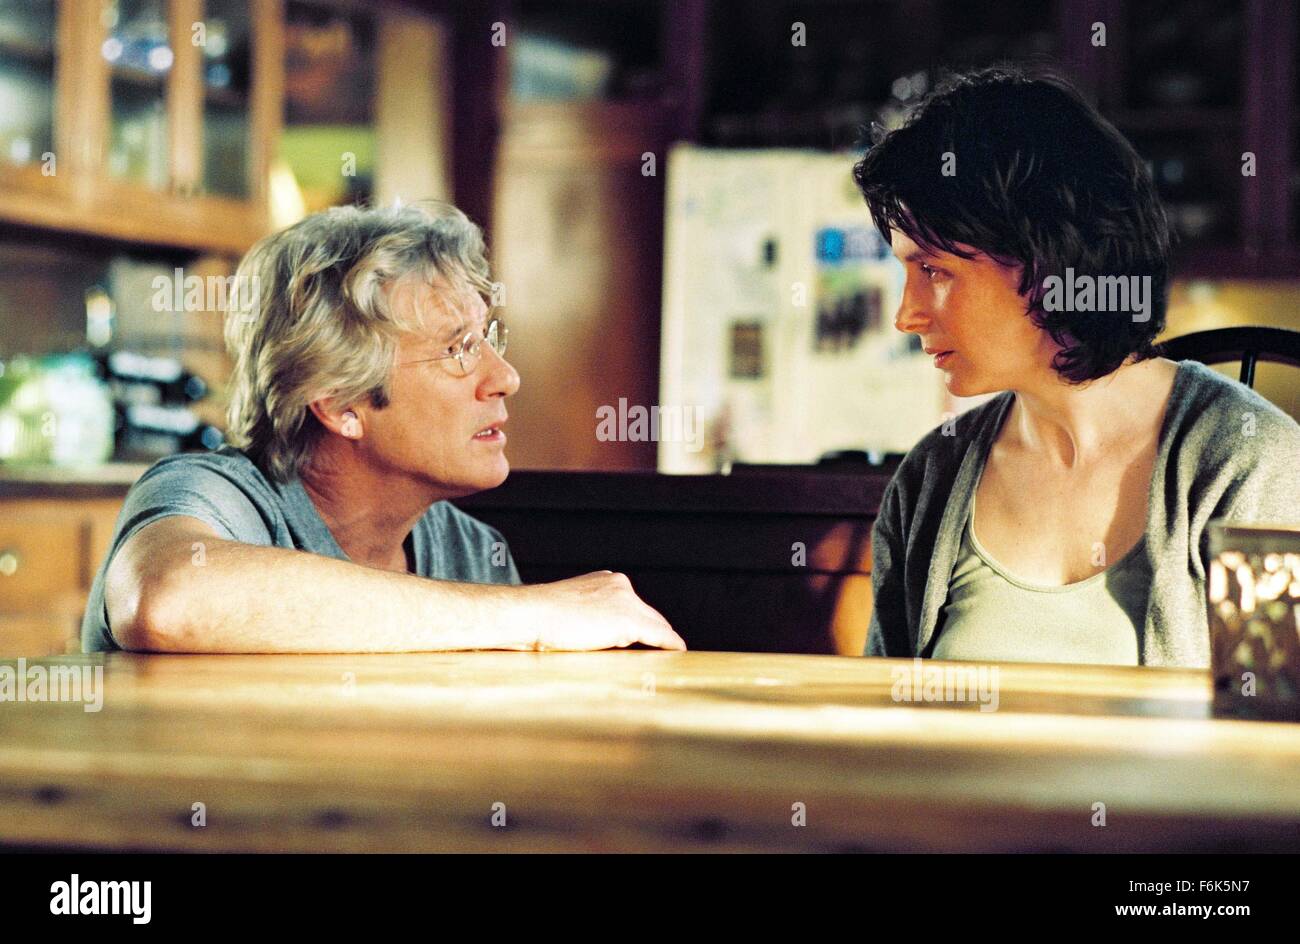 RELEASE DATE: September 3, 2005. MOVIE TITLE: Bee Season. STUDIO: Fox Searchlight. PLOT: A wife and mother begins a downward emotional spiral, as her husband avoids their collapsing marriage by immersing himself in his 11 year-old daughter's quest to become a spelling bee champion. PICTURED: RICHARD GERE as Saul Naumann and JULIETTE BINOCHE as Miriam Neumann. Stock Photo